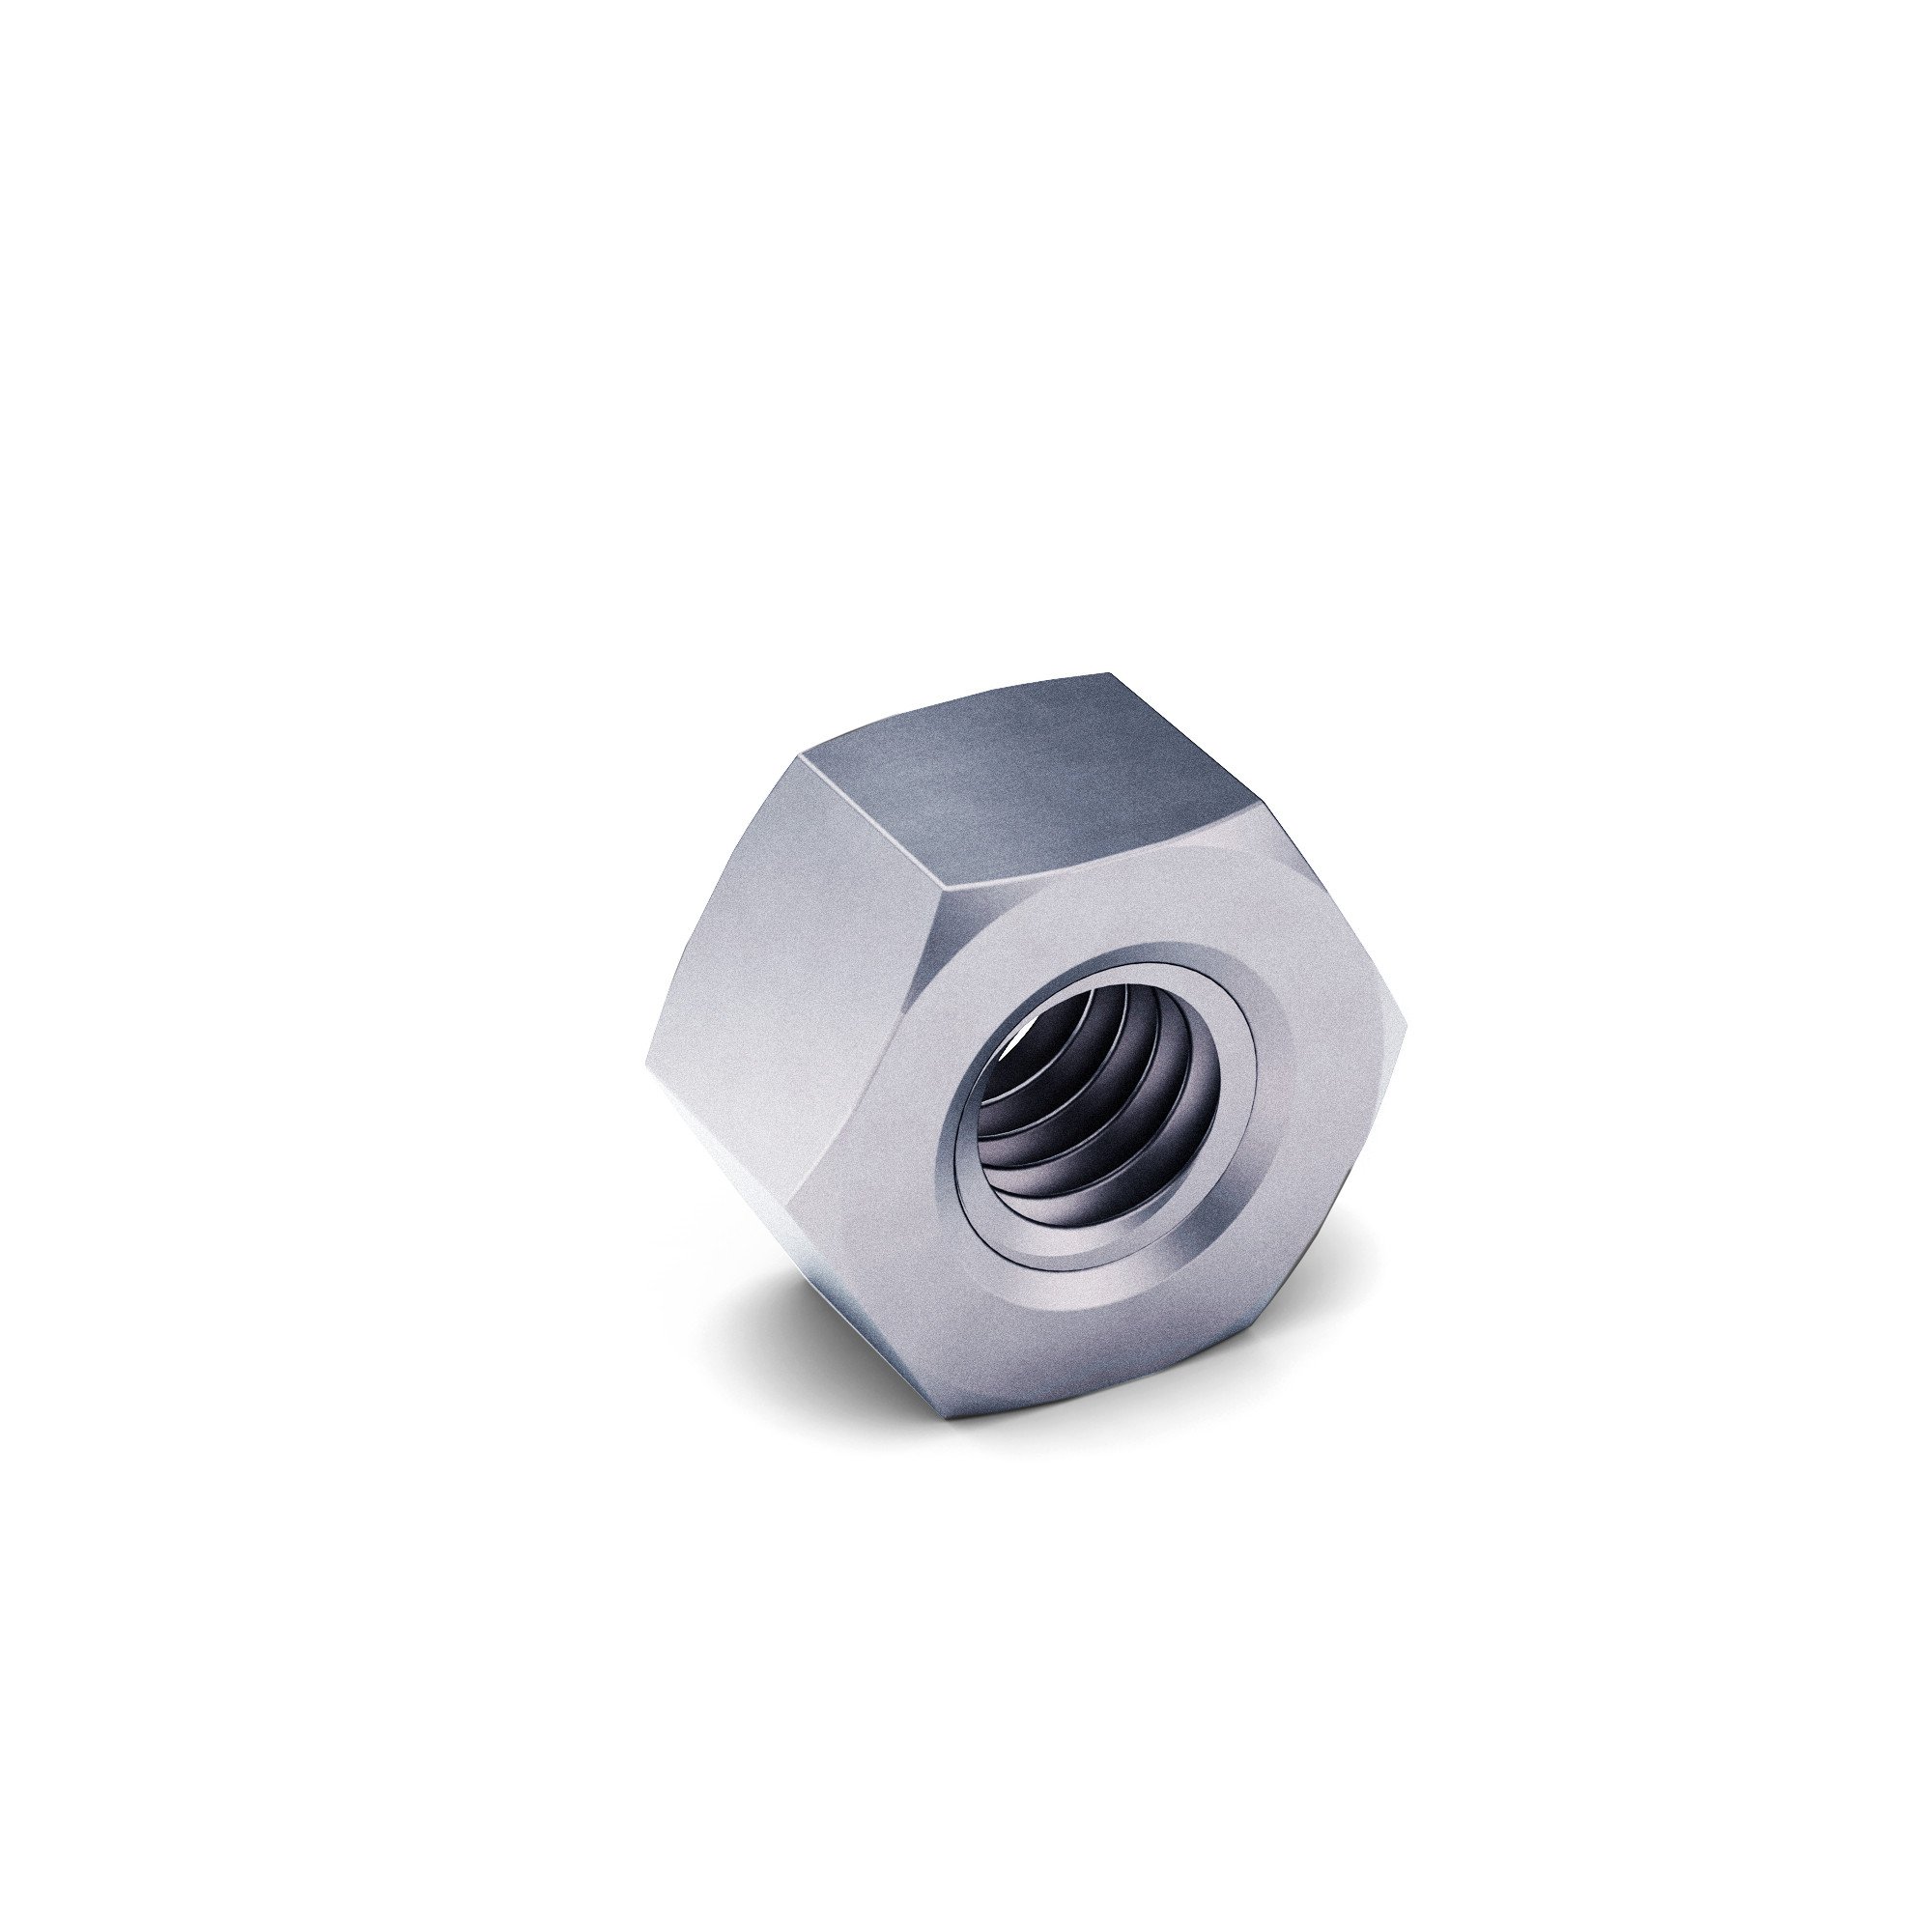 1/2-13 J995 GR 5 Hex Nut Zinc Clear Trivalent Made in USA